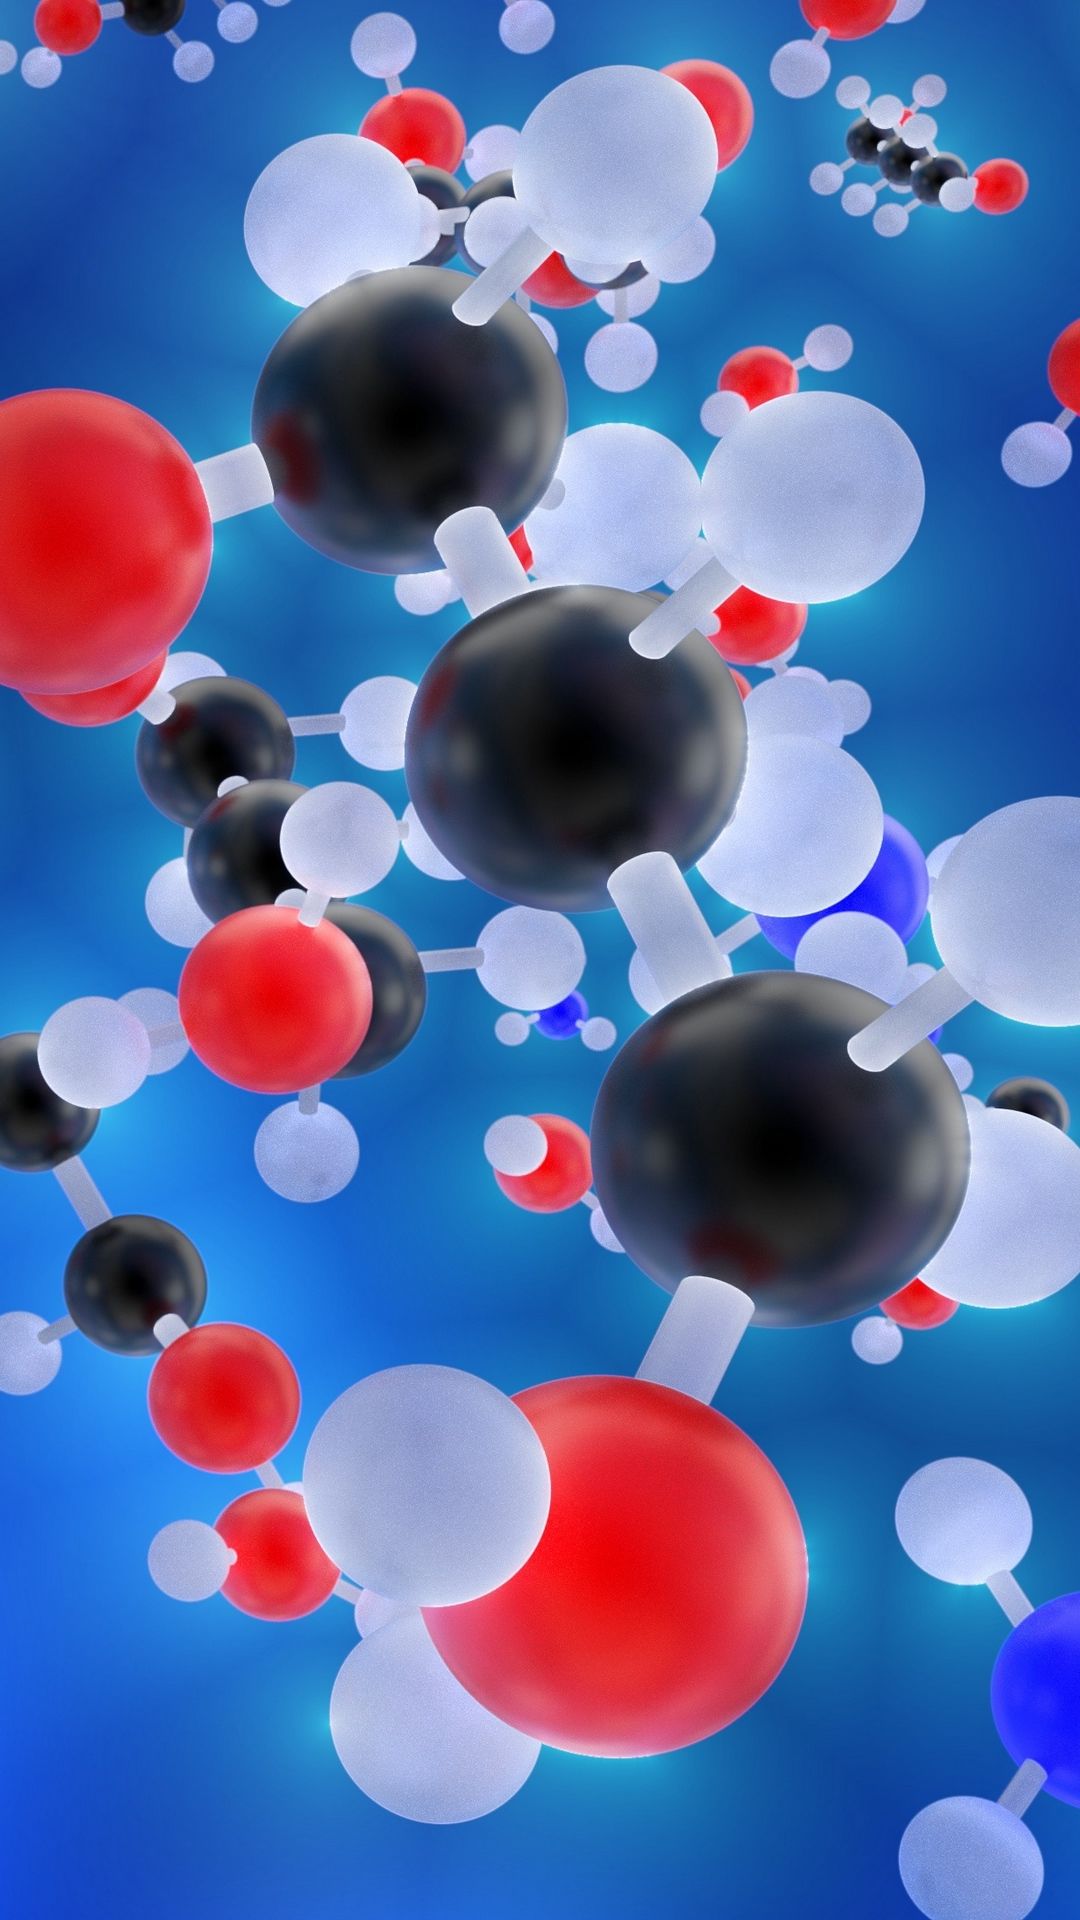 IPhone wallpaper with molecules. - Chemistry